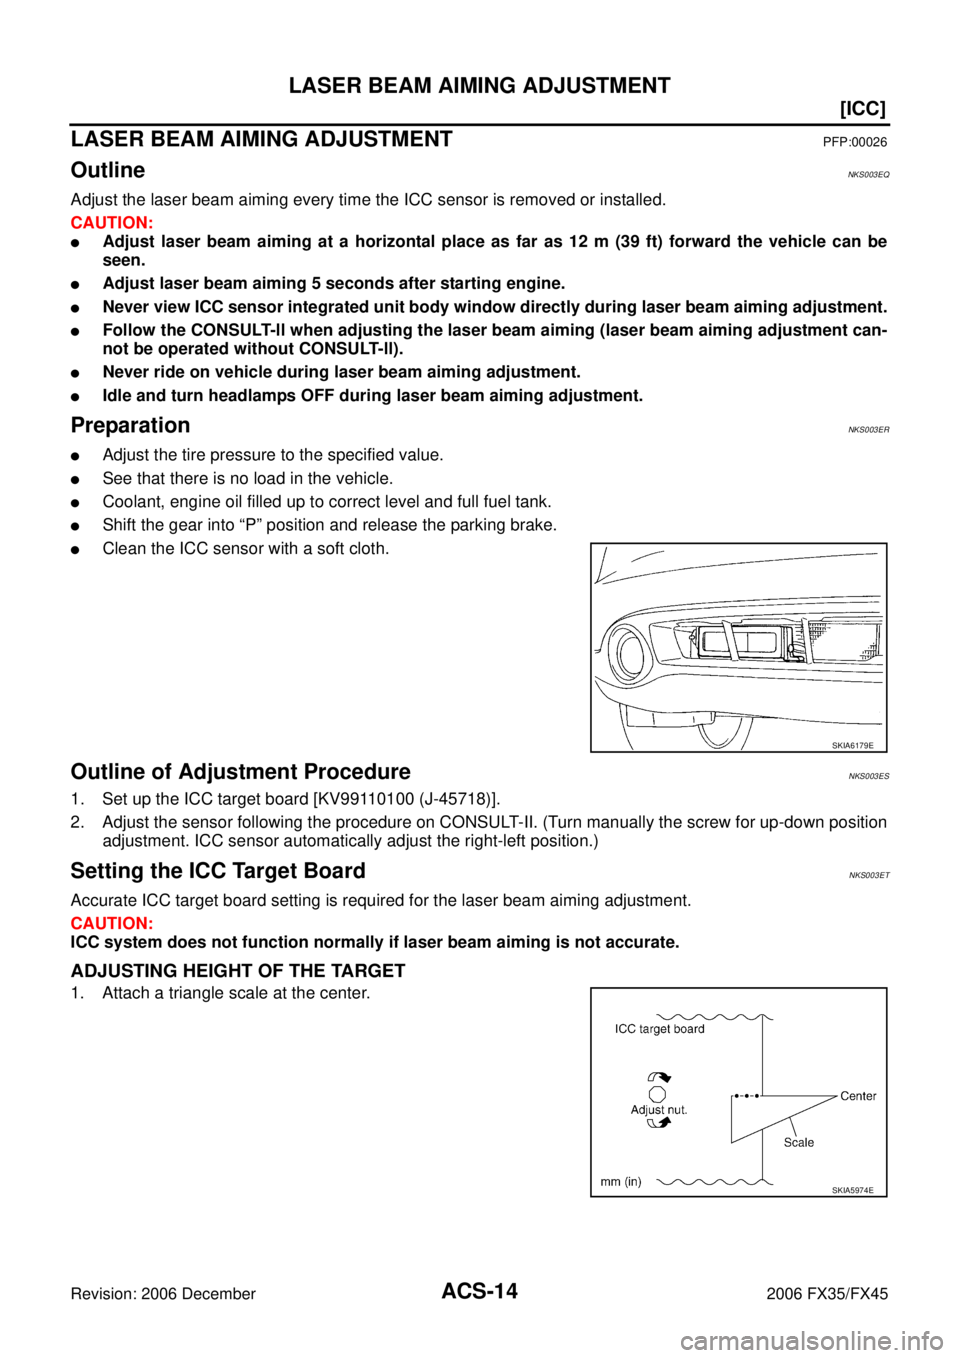 INFINITI FX35 2006  Service Manual ACS-14
[ICC]
LASER BEAM AIMING ADJUSTMENT
Revision: 2006 December 2006 FX35/FX45
LASER BEAM AIMING ADJUSTMENTPFP:00026
OutlineNKS003EQ
Adjust the laser beam aiming every time the ICC sensor is removed